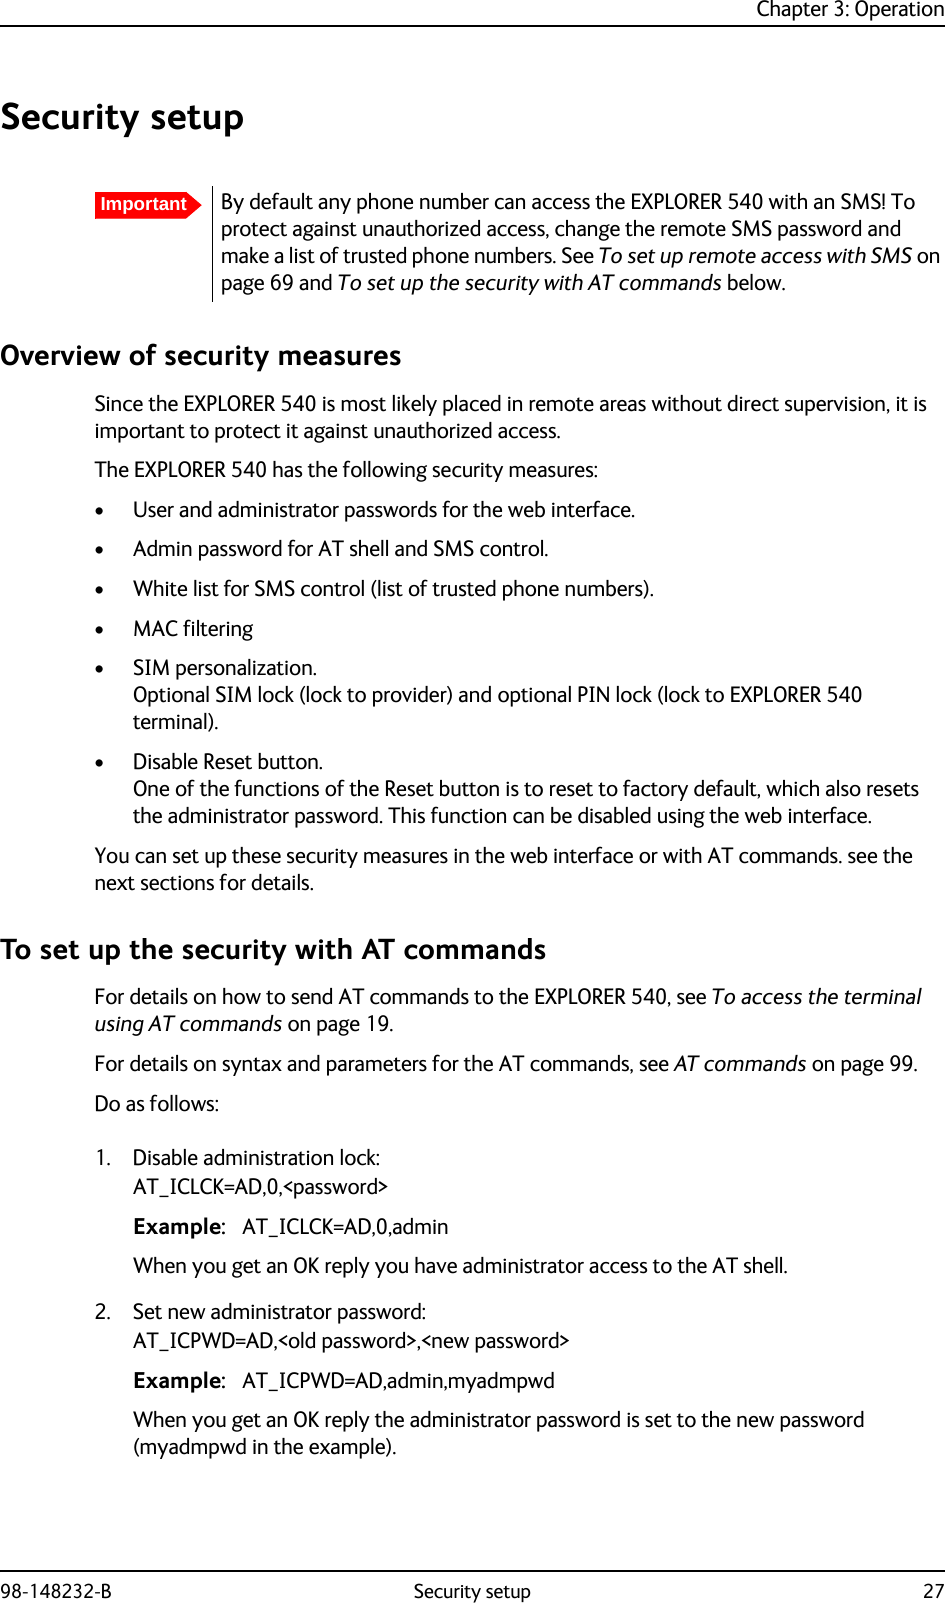 Chapter 3: Operation98-148232-B Security setup 27Security setupOverview of security measuresSince the EXPLORER 540 is most likely placed in remote areas without direct supervision, it is important to protect it against unauthorized access. The EXPLORER 540 has the following security measures:• User and administrator passwords for the web interface.• Admin password for AT shell and SMS control.• White list for SMS control (list of trusted phone numbers).•MAC filtering• SIM personalization. Optional SIM lock (lock to provider) and optional PIN lock (lock to EXPLORER 540 terminal). • Disable Reset button. One of the functions of the Reset button is to reset to factory default, which also resets the administrator password. This function can be disabled using the web interface.You can set up these security measures in the web interface or with AT commands. see the next sections for details.To set up the security with AT commandsFor details on how to send AT commands to the EXPLORER 540, see To access the terminal using AT commands on page 19.For details on syntax and parameters for the AT commands, see AT commands on page 99.Do as follows:1. Disable administration lock:AT_ICLCK=AD,0,&lt;password&gt;Example: AT_ICLCK=AD,0,adminWhen you get an OK reply you have administrator access to the AT shell.2. Set new administrator password:AT_ICPWD=AD,&lt;old password&gt;,&lt;new password&gt;Example: AT_ICPWD=AD,admin,myadmpwdWhen you get an OK reply the administrator password is set to the new password (myadmpwd in the example).ImportantBy default any phone number can access the EXPLORER 540 with an SMS! To protect against unauthorized access, change the remote SMS password and make a list of trusted phone numbers. See To set up remote access with SMS on page 69 and To set up the security with AT commands below.